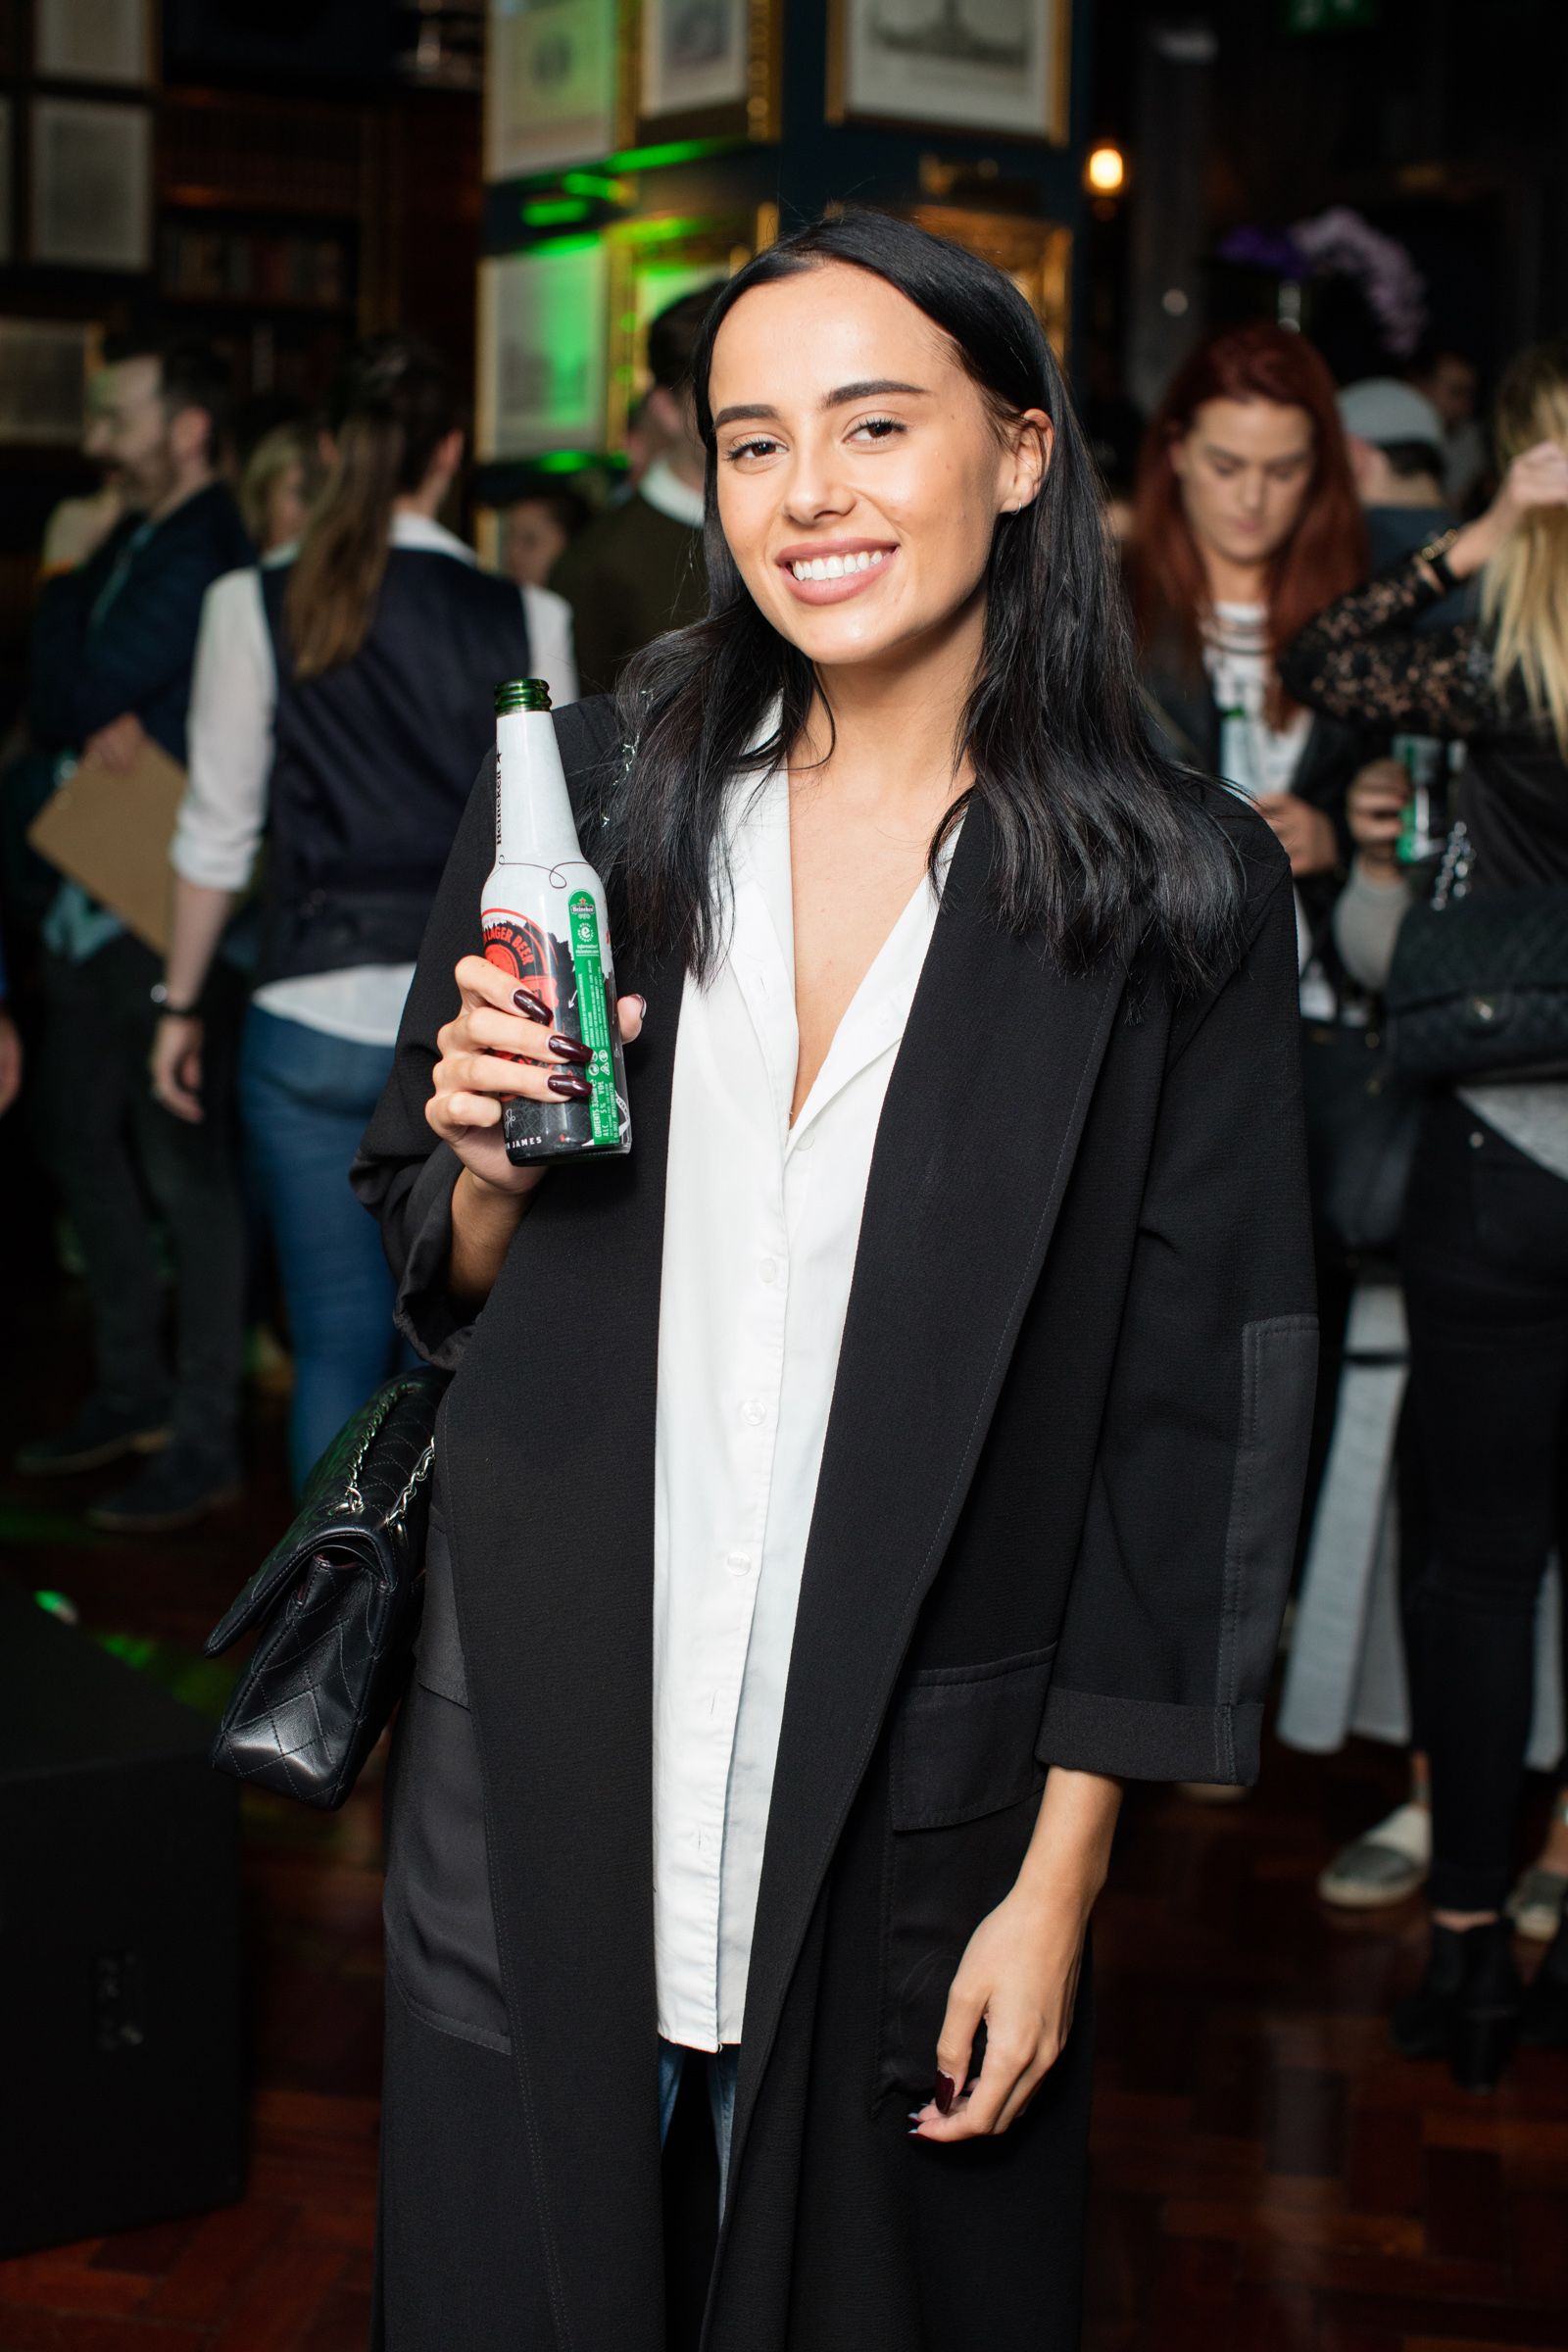 Lauren Bejaoui at the exclusive launch of the ‘Heineken Star Series’, a series of bespoke bottle designs created by Heineken in collaboration with an array of Irish stars, to celebrate the best in Irish arts, culture, music and sport. Kicking off the collaborative series was Irish singer-songwriter Gavin James who performed a few of his well known hits after a live Q&A style interview in The Ivy, Parliament Street. #StarSeries @Heineken_IE www.facebook.com/HeinekenIE Photo: Anthony Woods